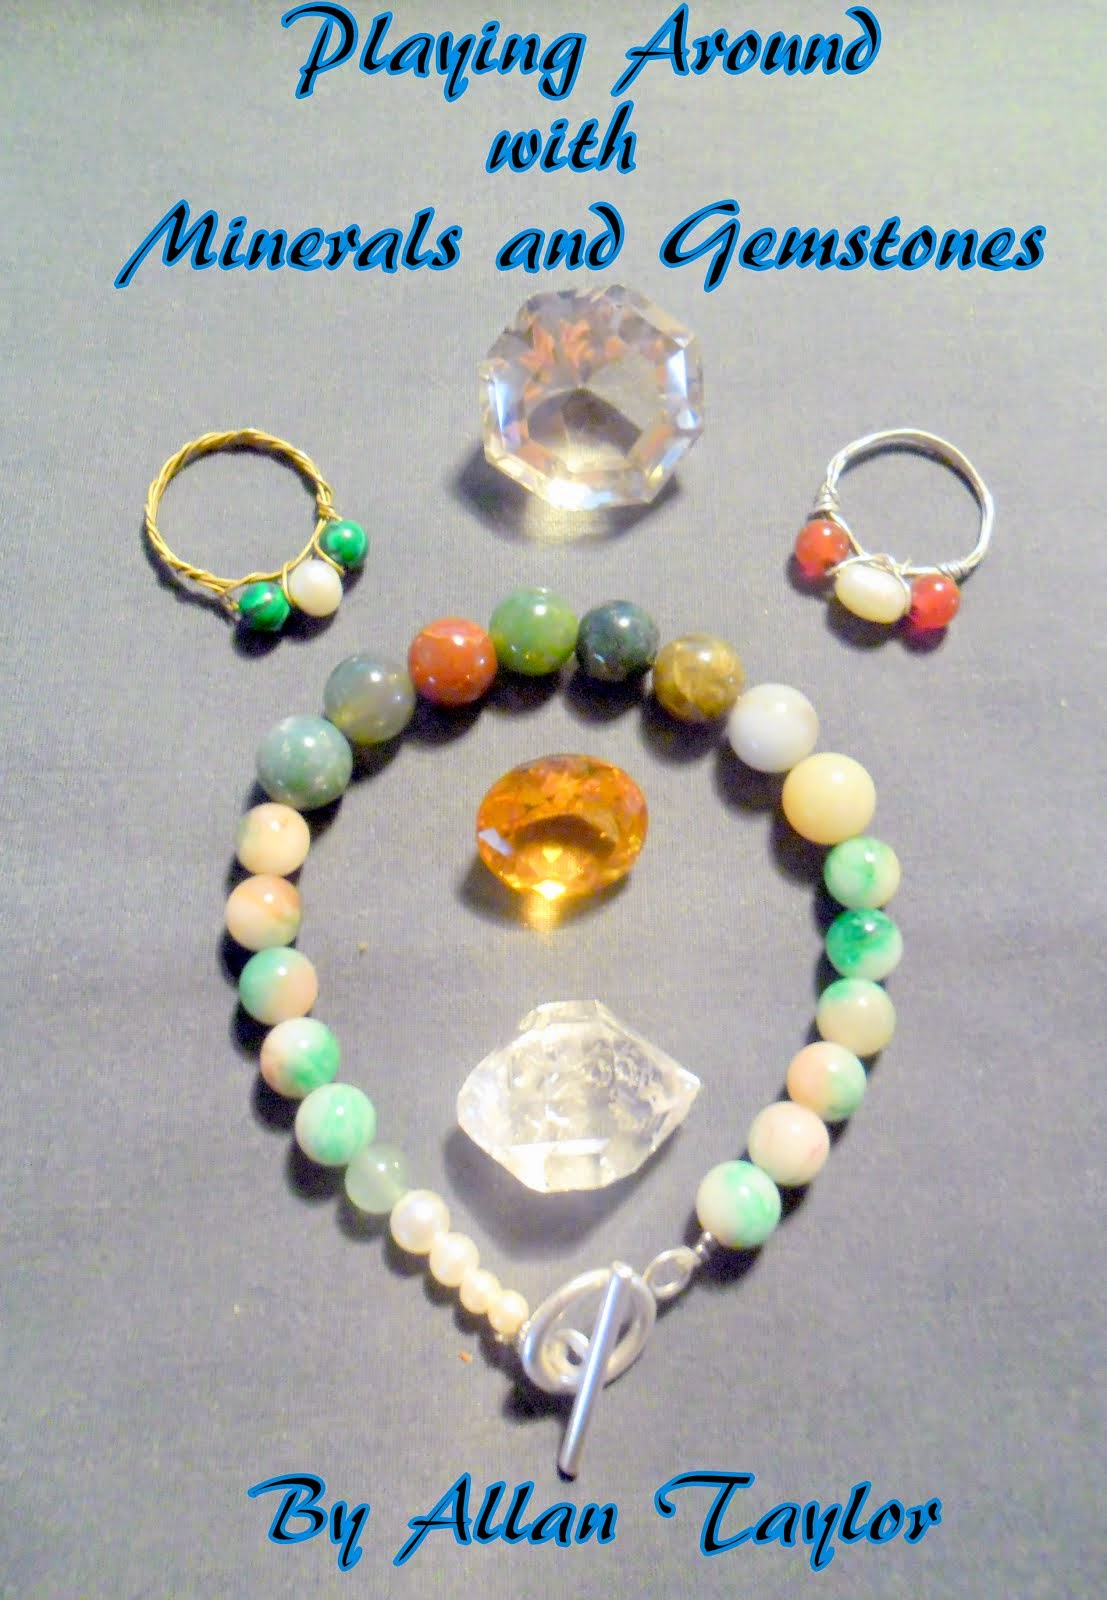 An Introduction to Minerals & Gemstones